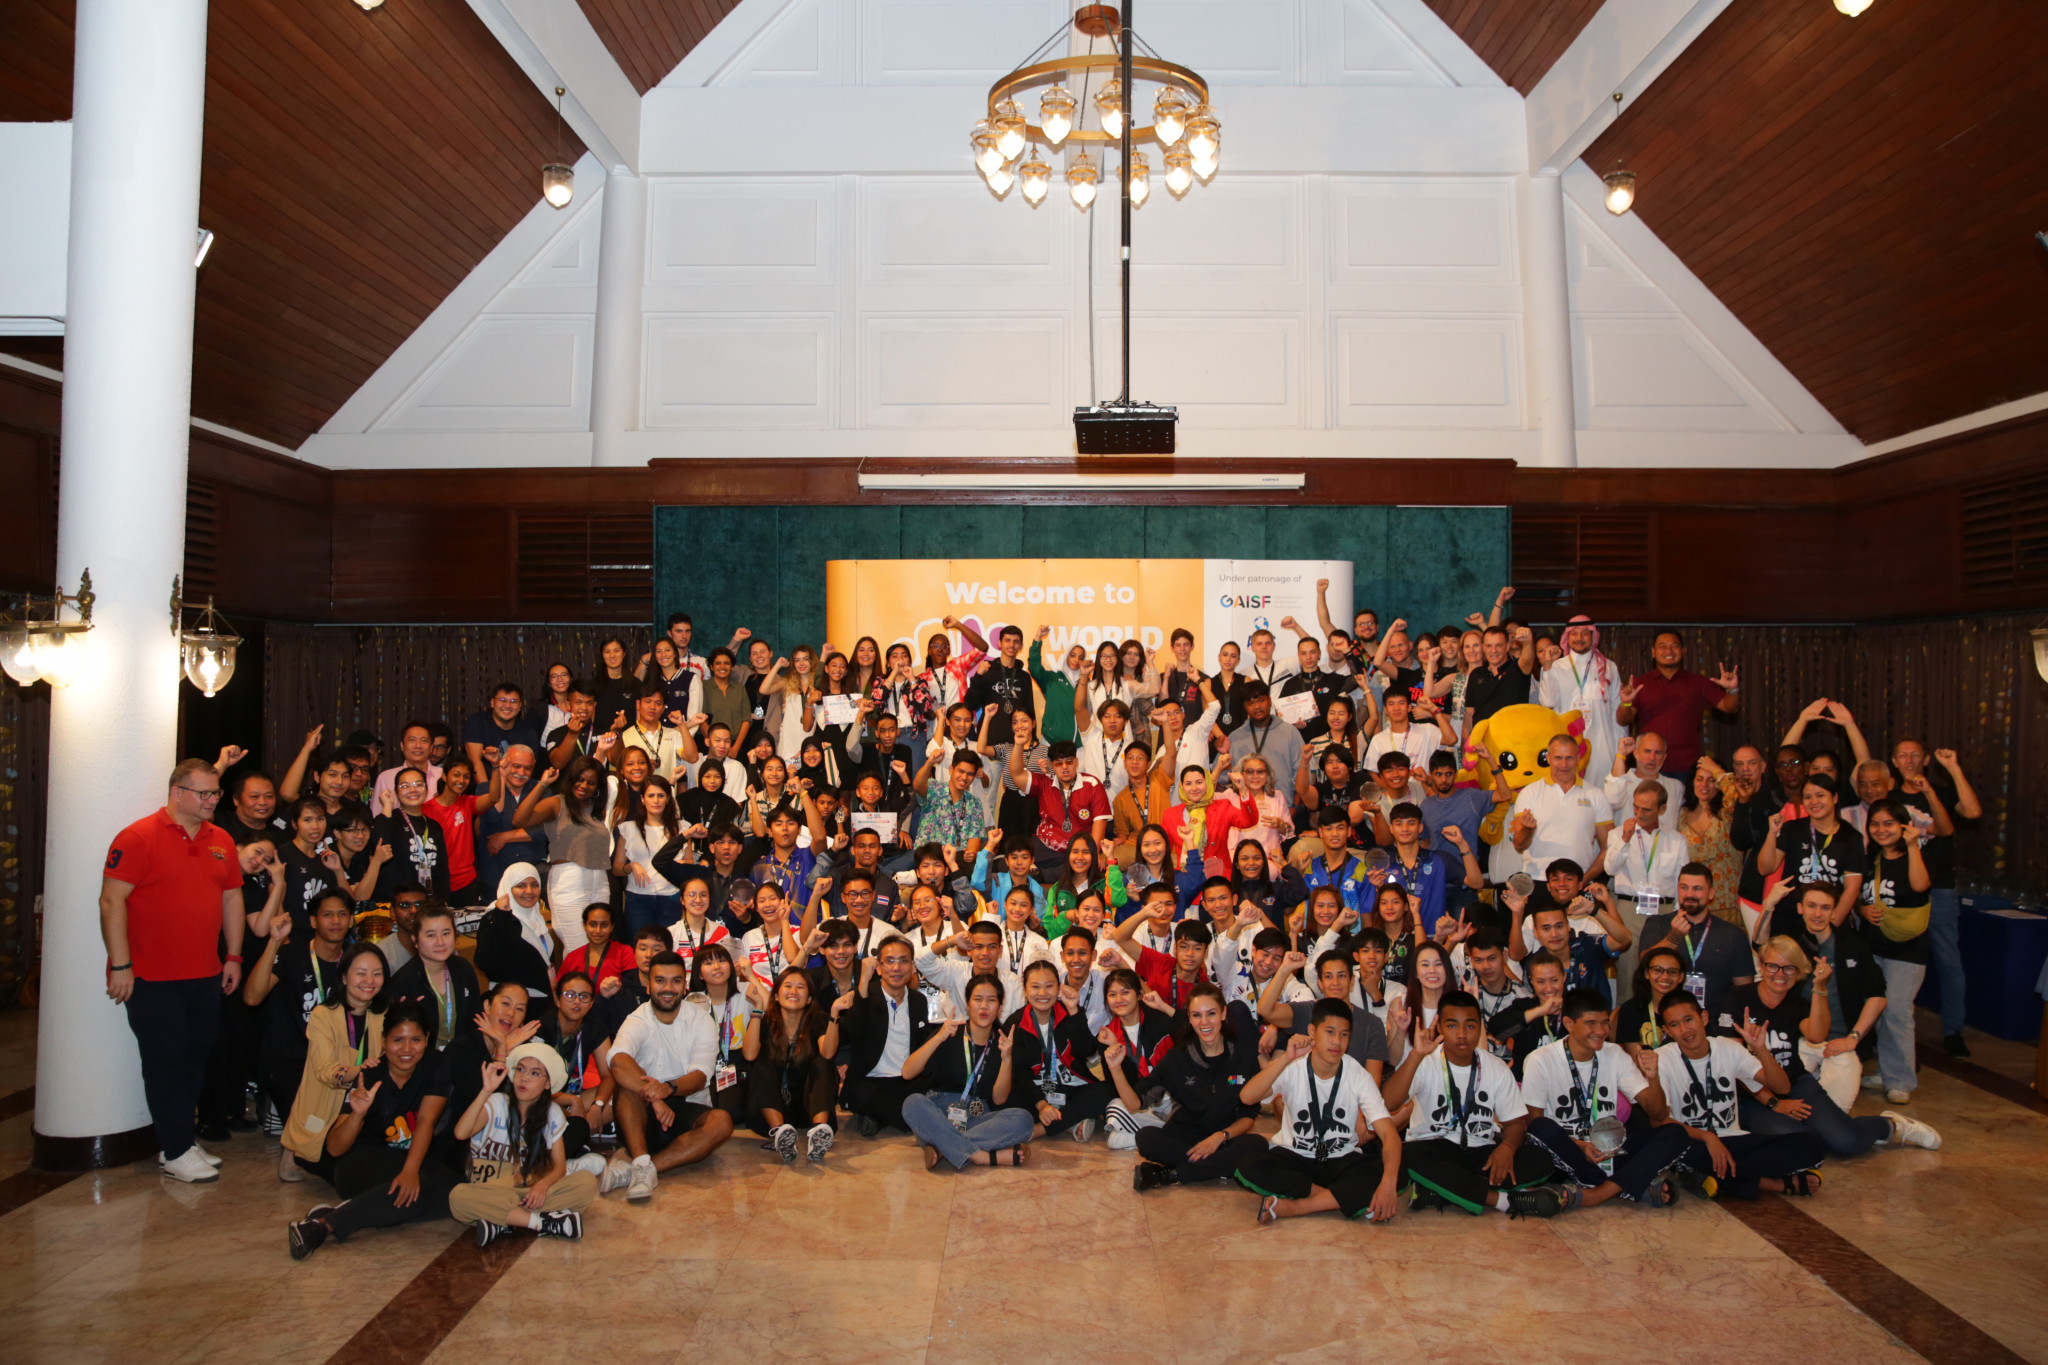 UTS hosted a dinner and distributed medals and awards for participants ©UTS